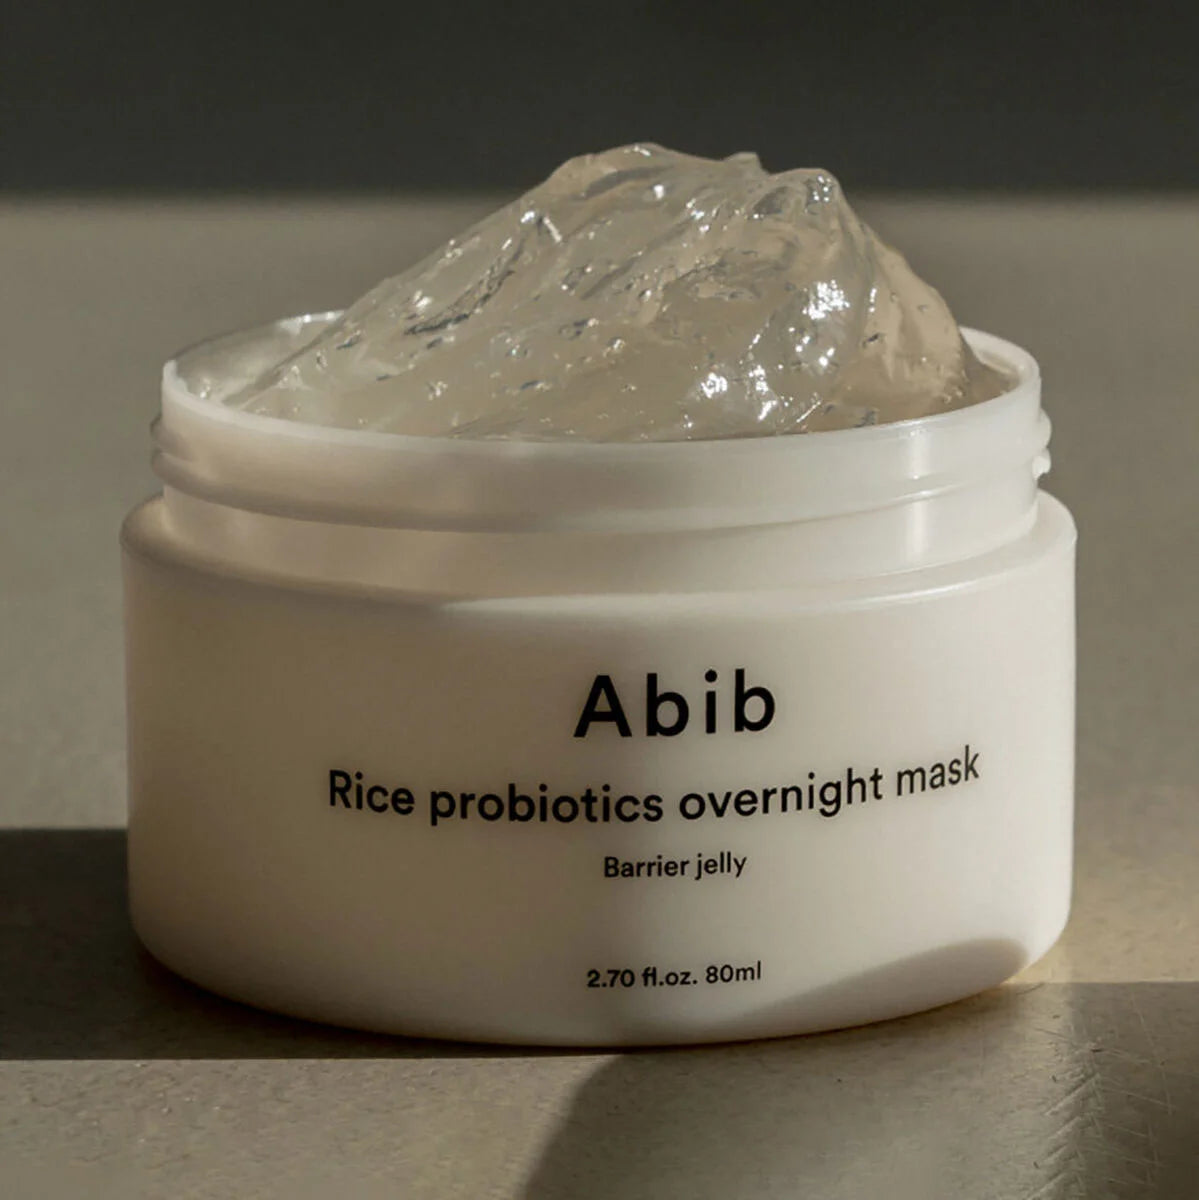 Abib Rice Probiotics Overnight Mask lightweight soothing hydrating gel for face mask moisturizer hydrating dry dehydrated oily combination sensitive acne prone skin K Beauty World